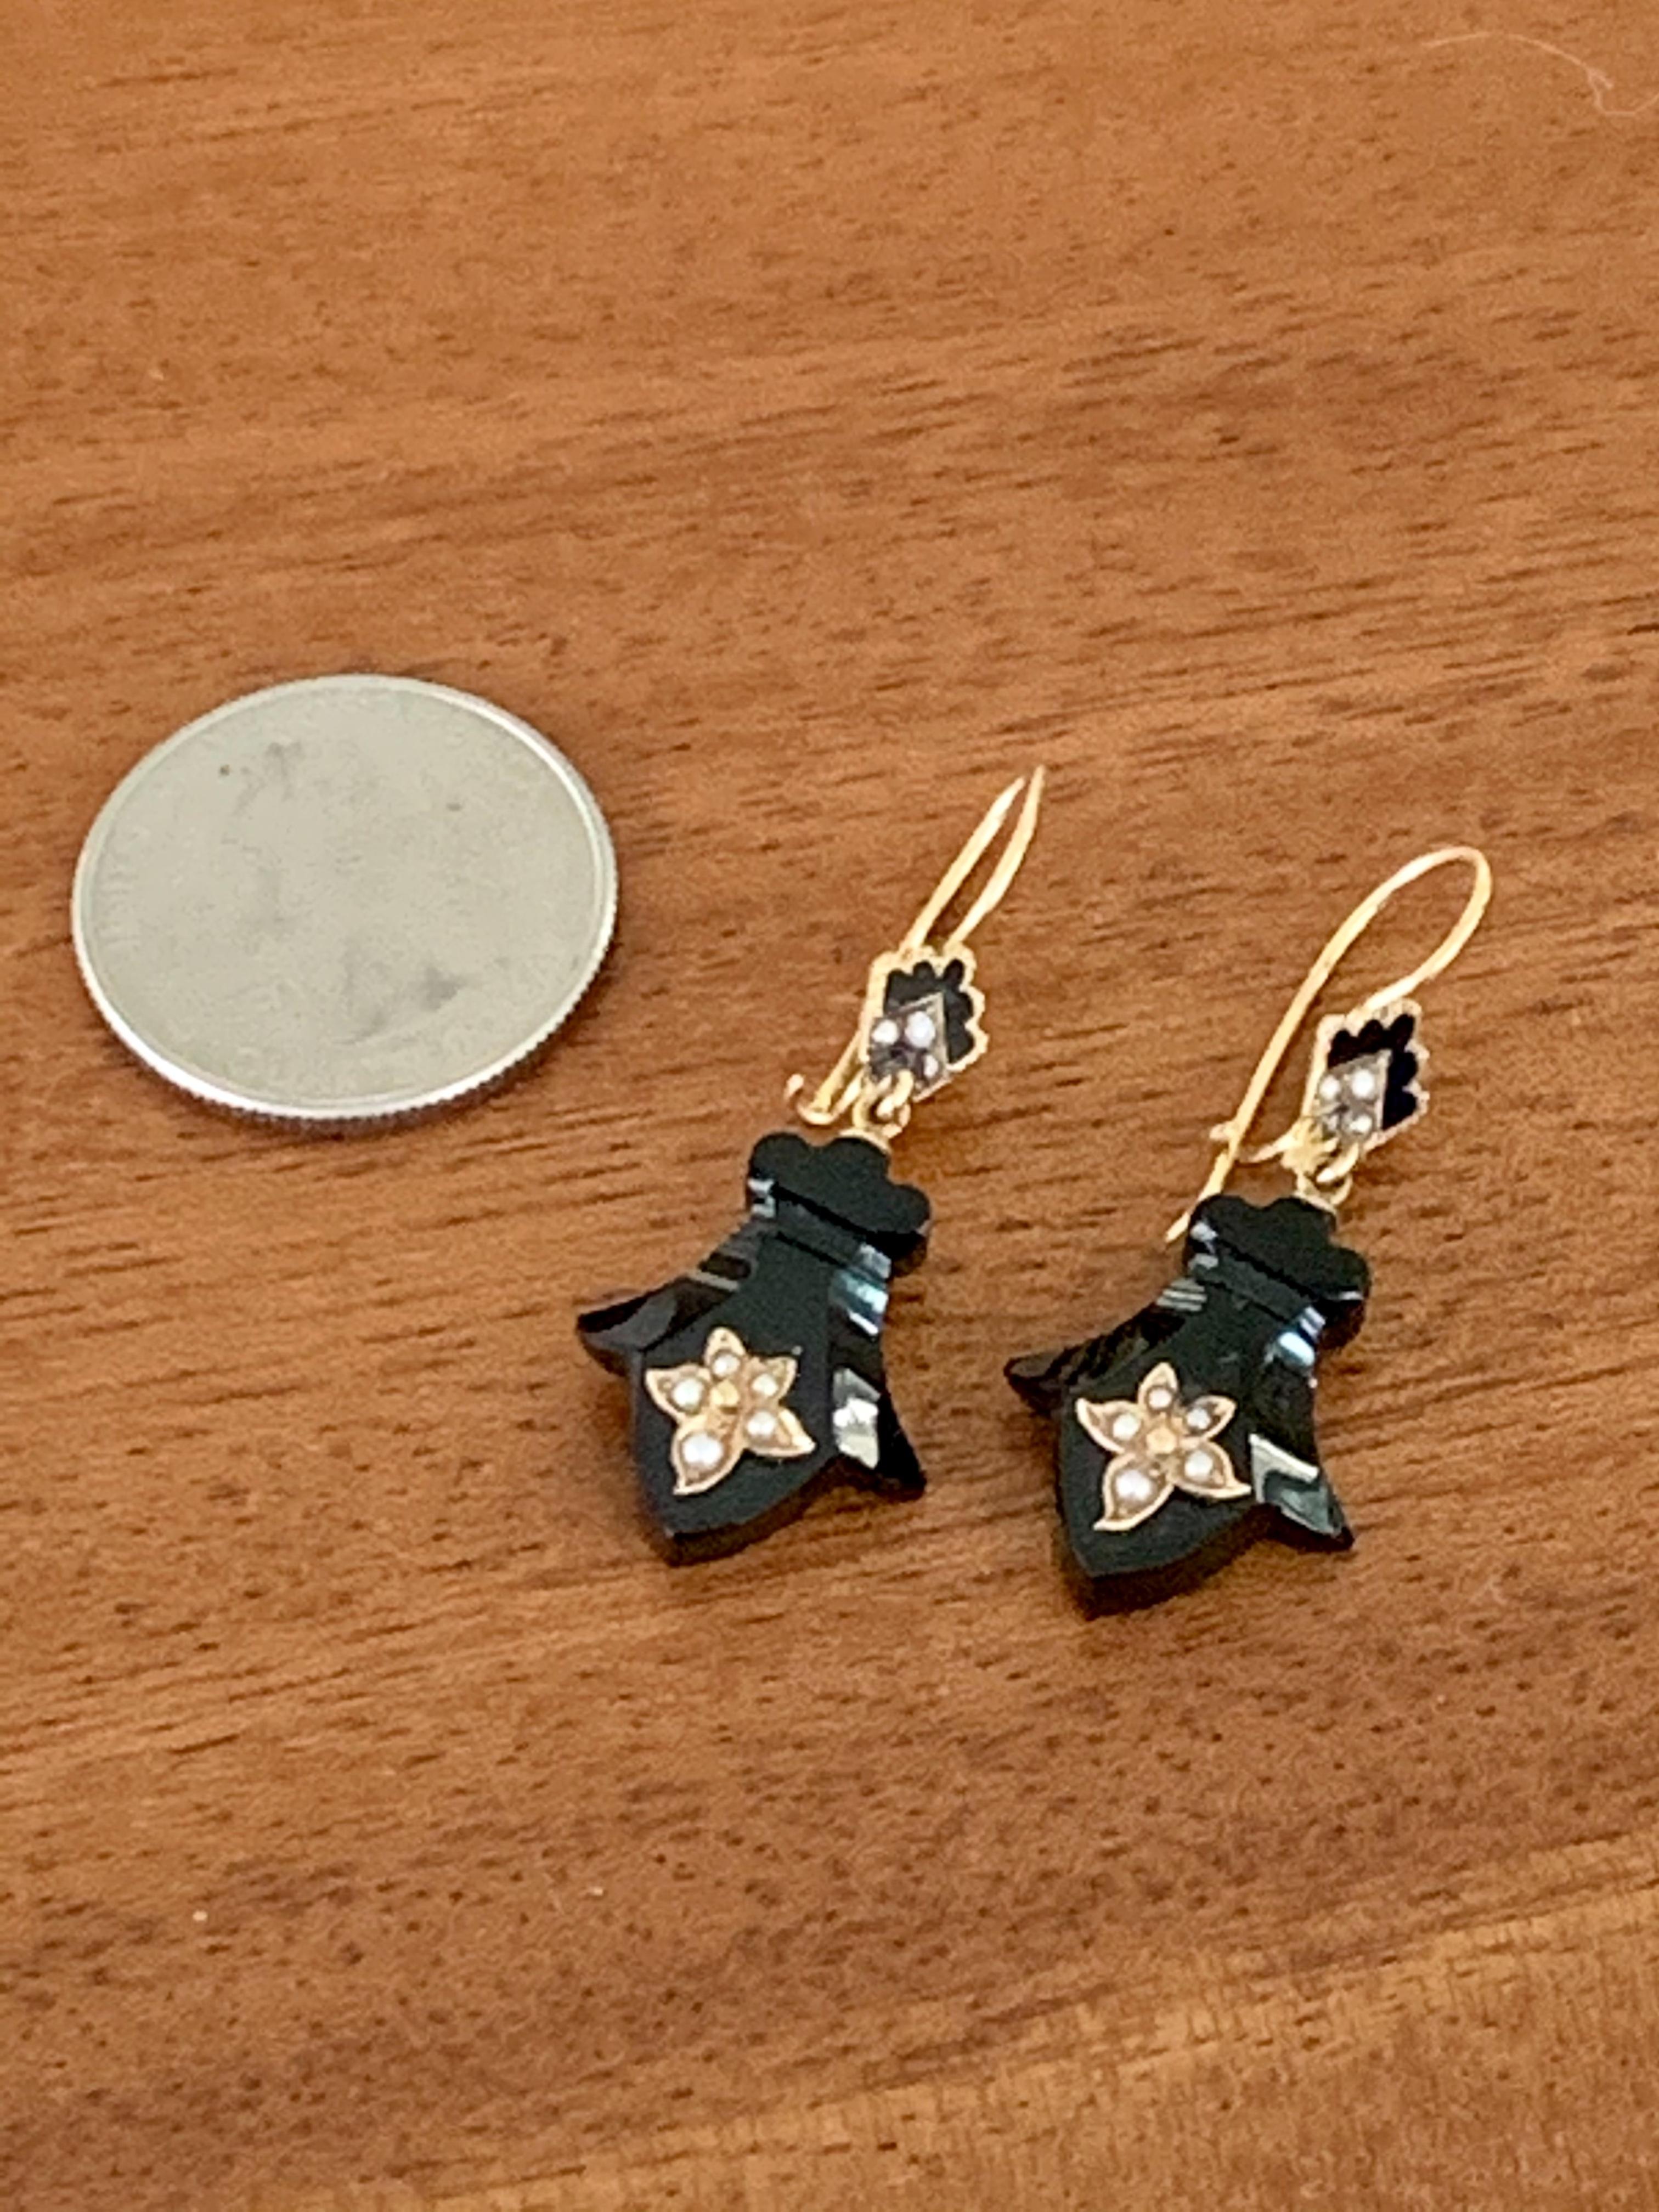 These fabulous, vintage 1910's to 1920's earrings feature a Trefoil-shaped piece of black Onyx which provides a backdrop to a seed Pearl flower design.  There is also a piece of black Onyx accented by seed Pearls which is on the piece of the earring